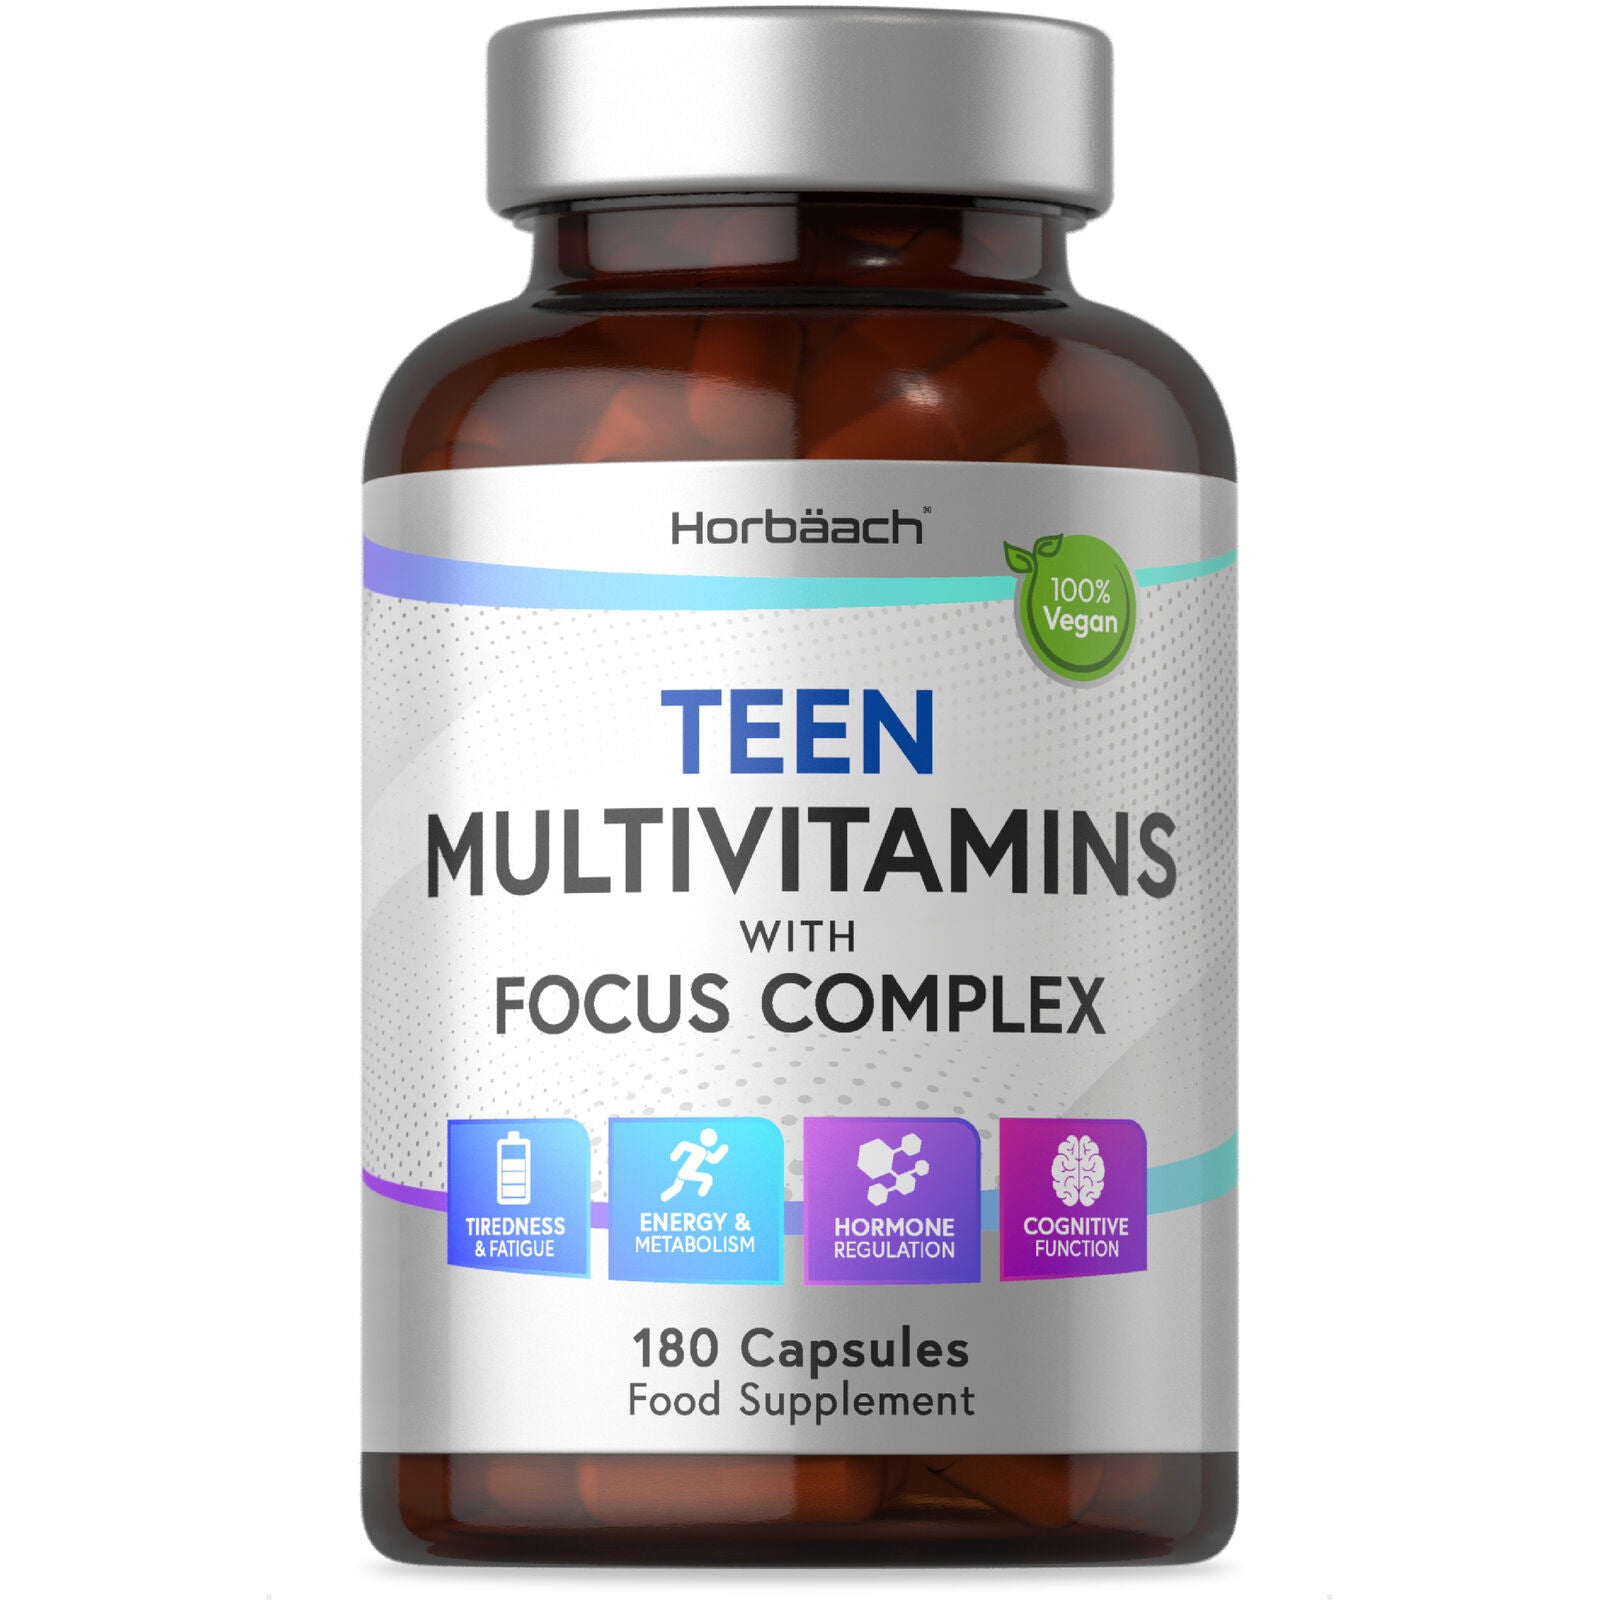 Multivitamins with Focus Complex for Teens | 180 Capsules